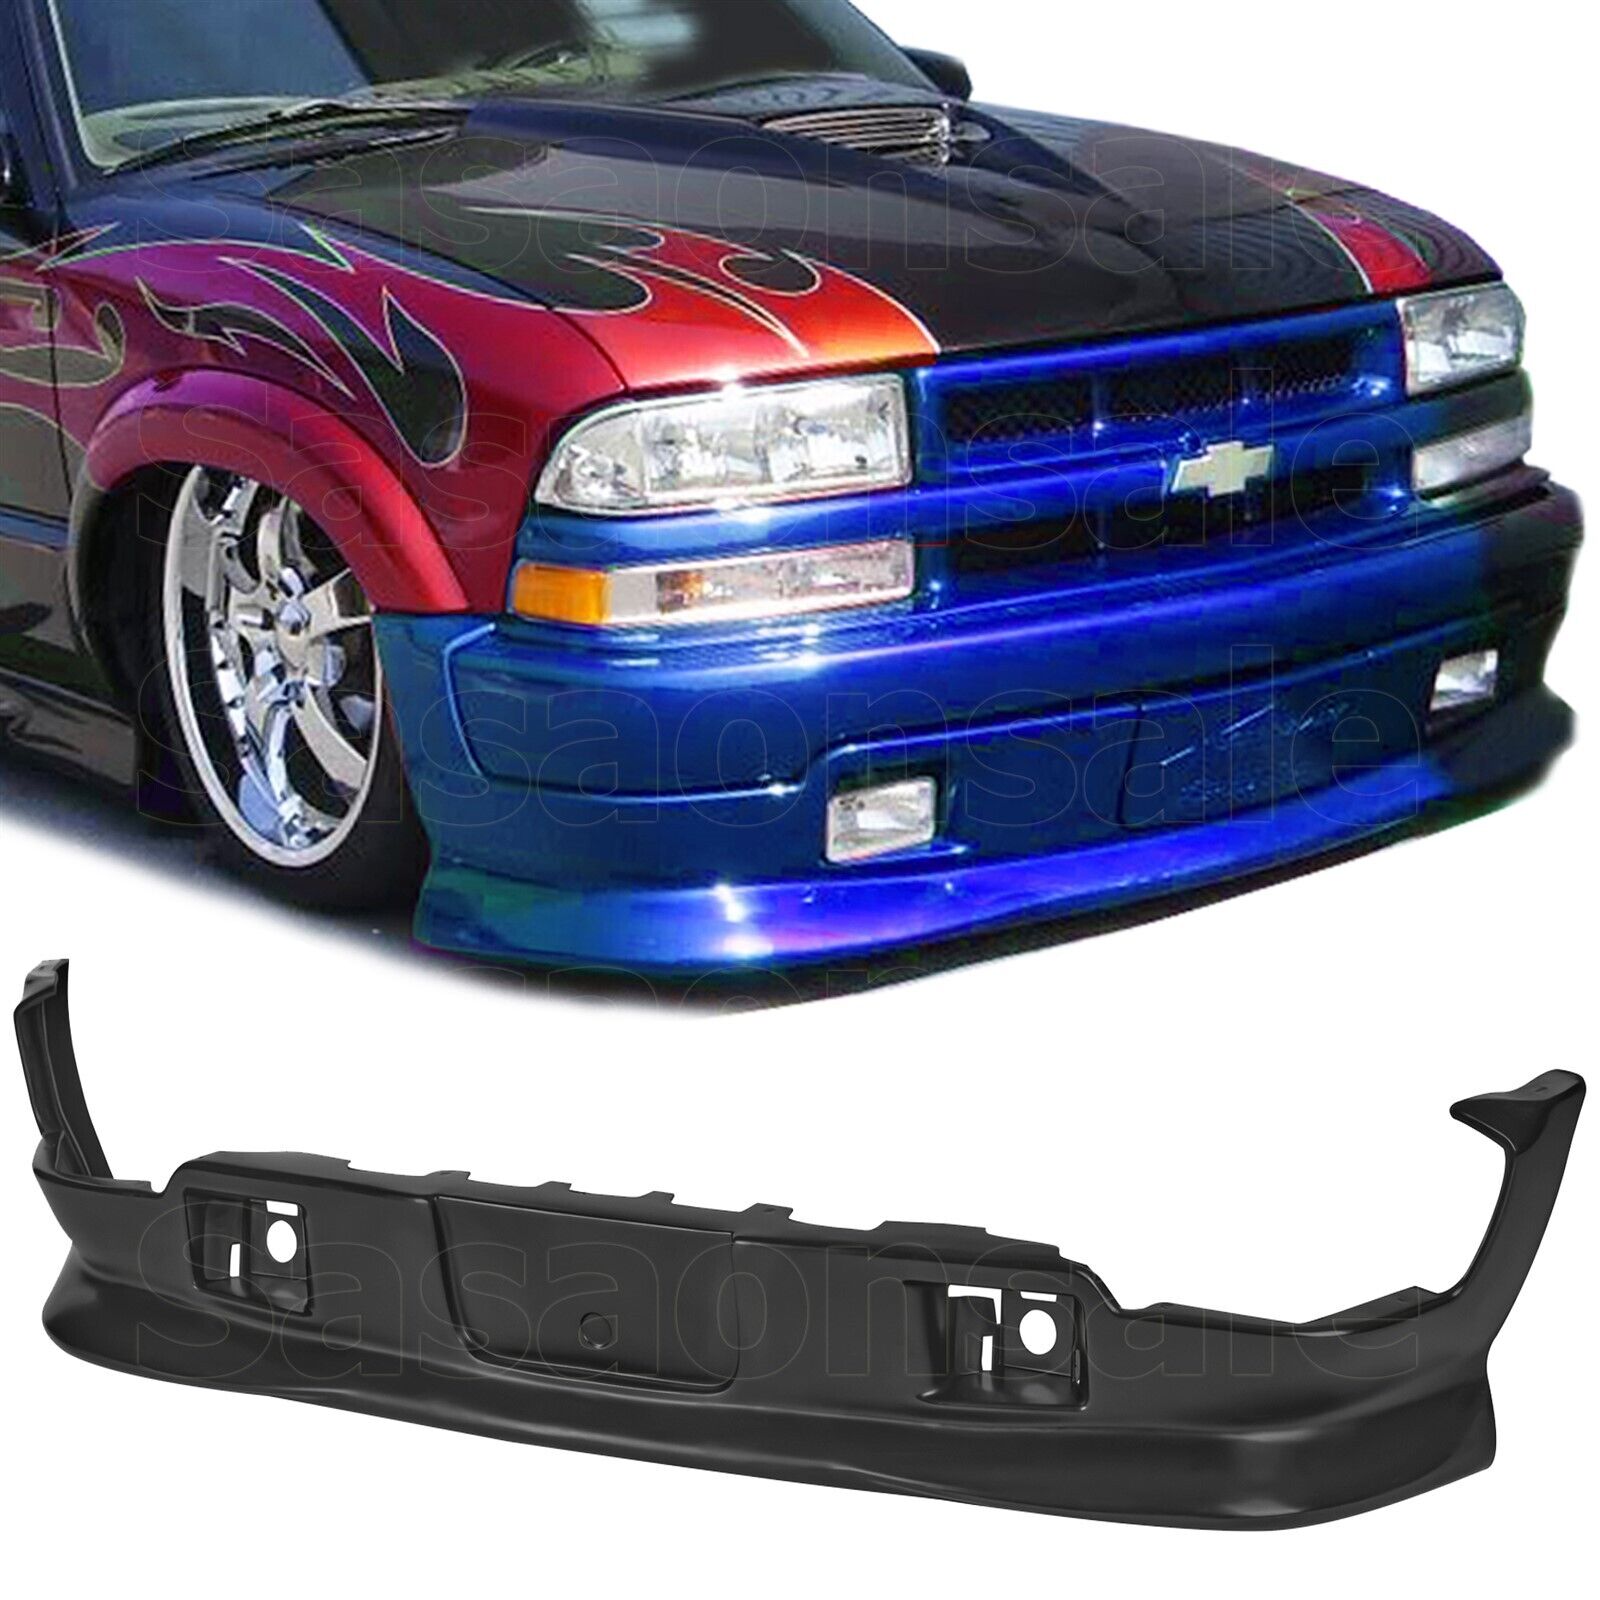 [SASA] Fit for 98-04 Chevrolet S10 Cab Pickup Xtreme PU Front Bumper Lip Spoiler